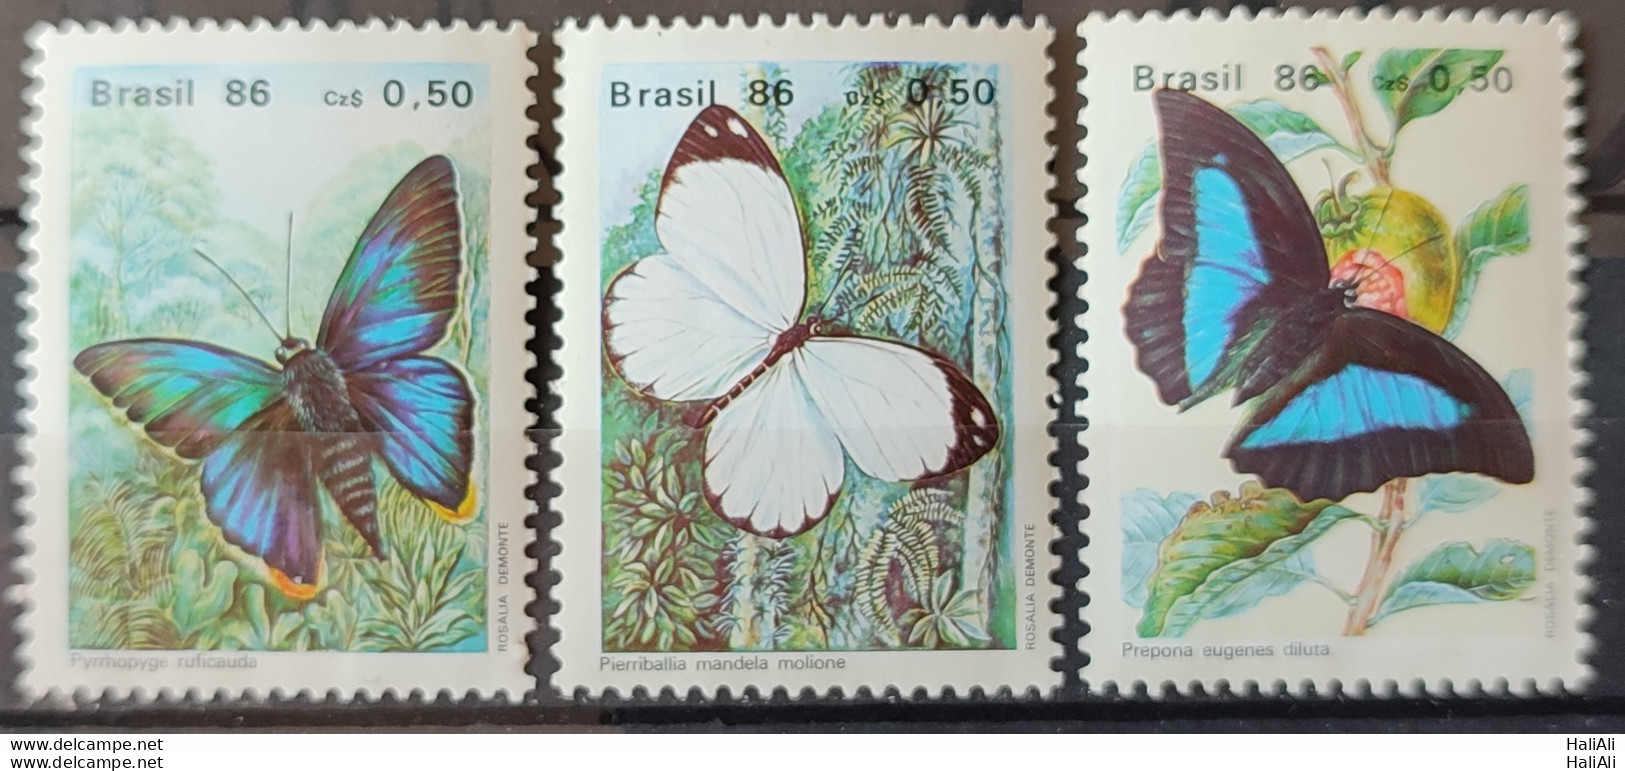 C 1512 Brazil Stamp Butterfly Insects 1986 Complete Series 2.jpg - Unused Stamps